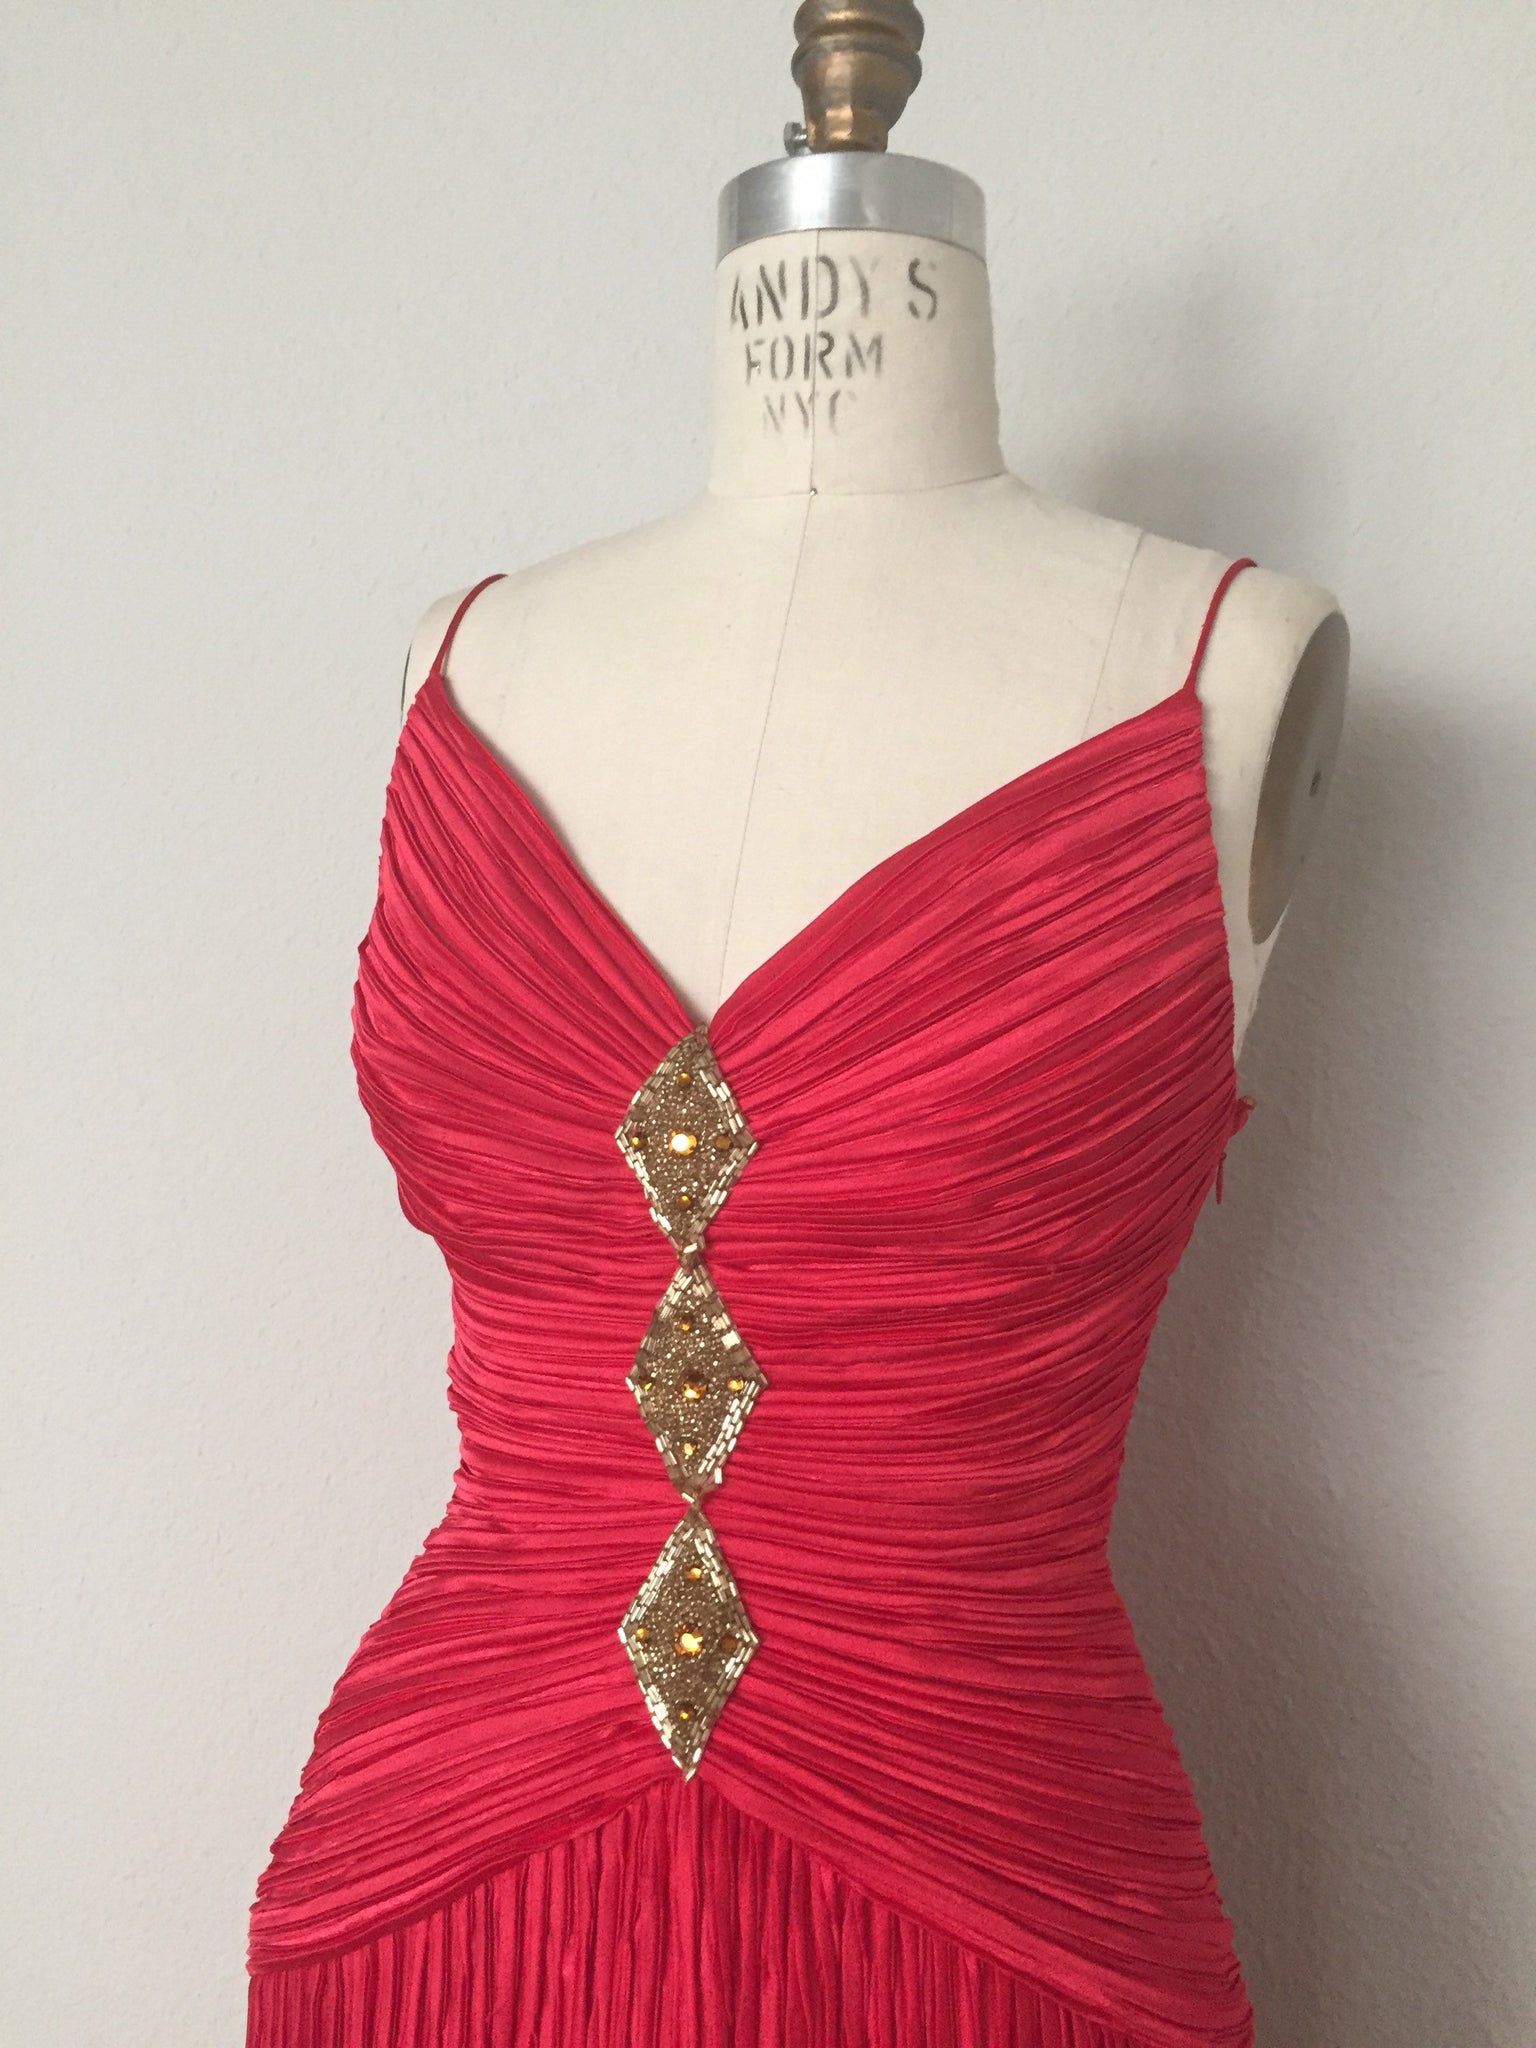 Vintage 80s Red Pleated Dress by George F Couture - ChicCityVintage